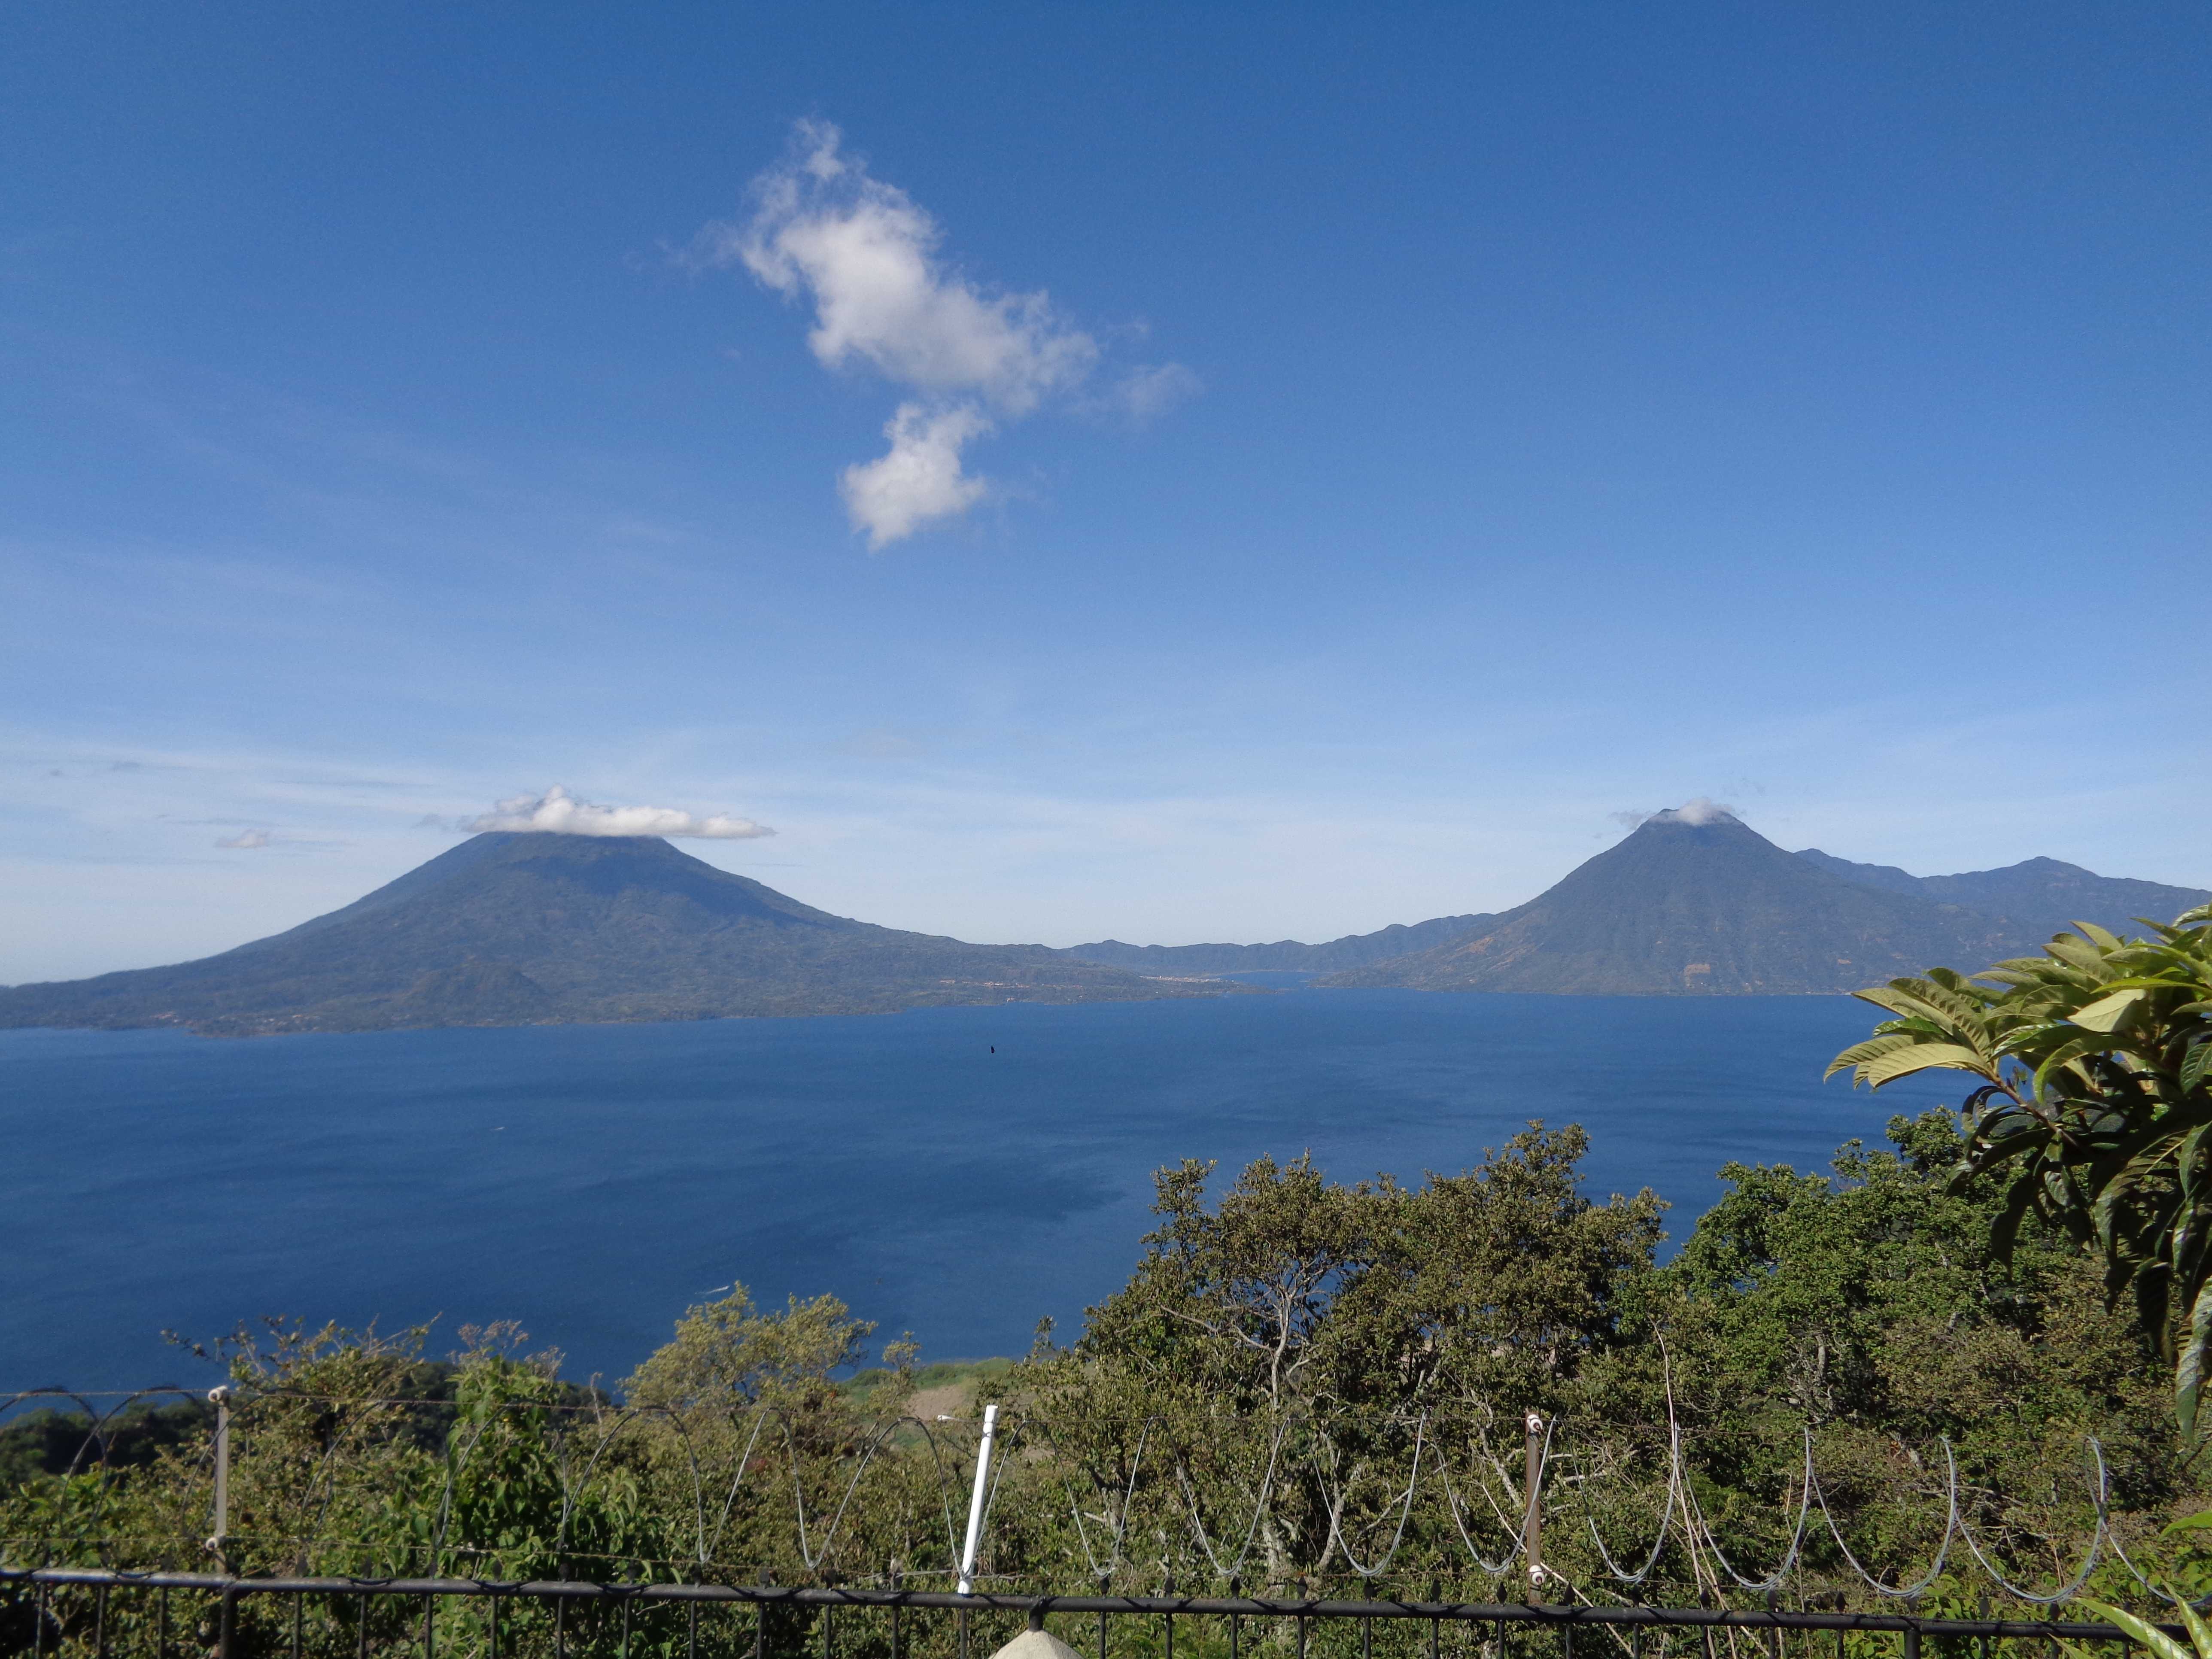 From the Tristar state to the Land of Eternal Spring: Vanderbilt and Guatemala